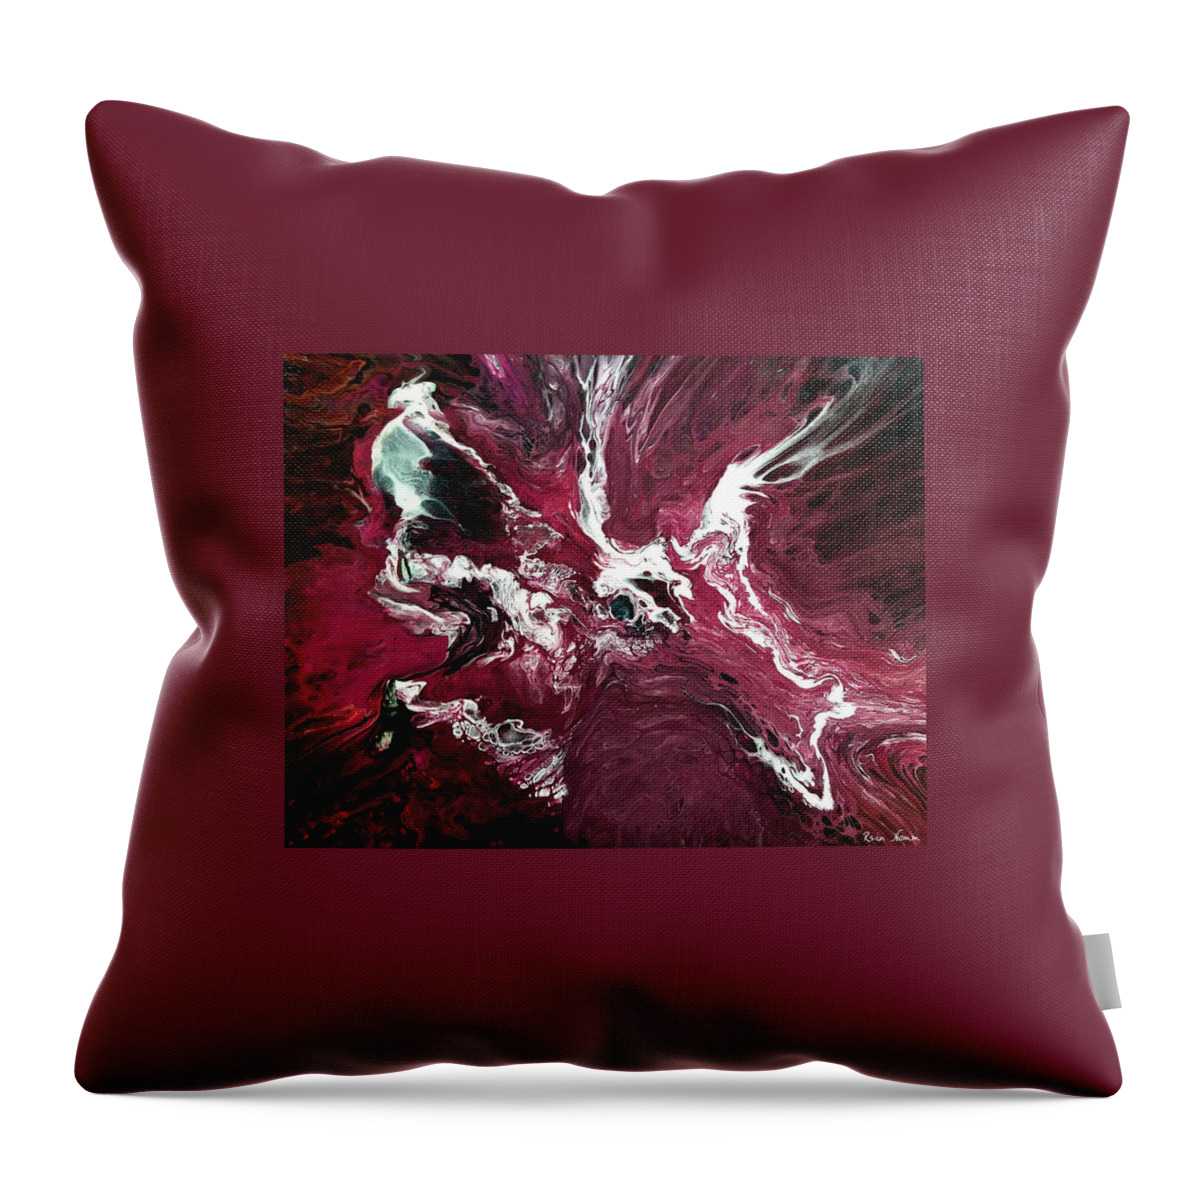  Throw Pillow featuring the painting An Instant by Rein Nomm